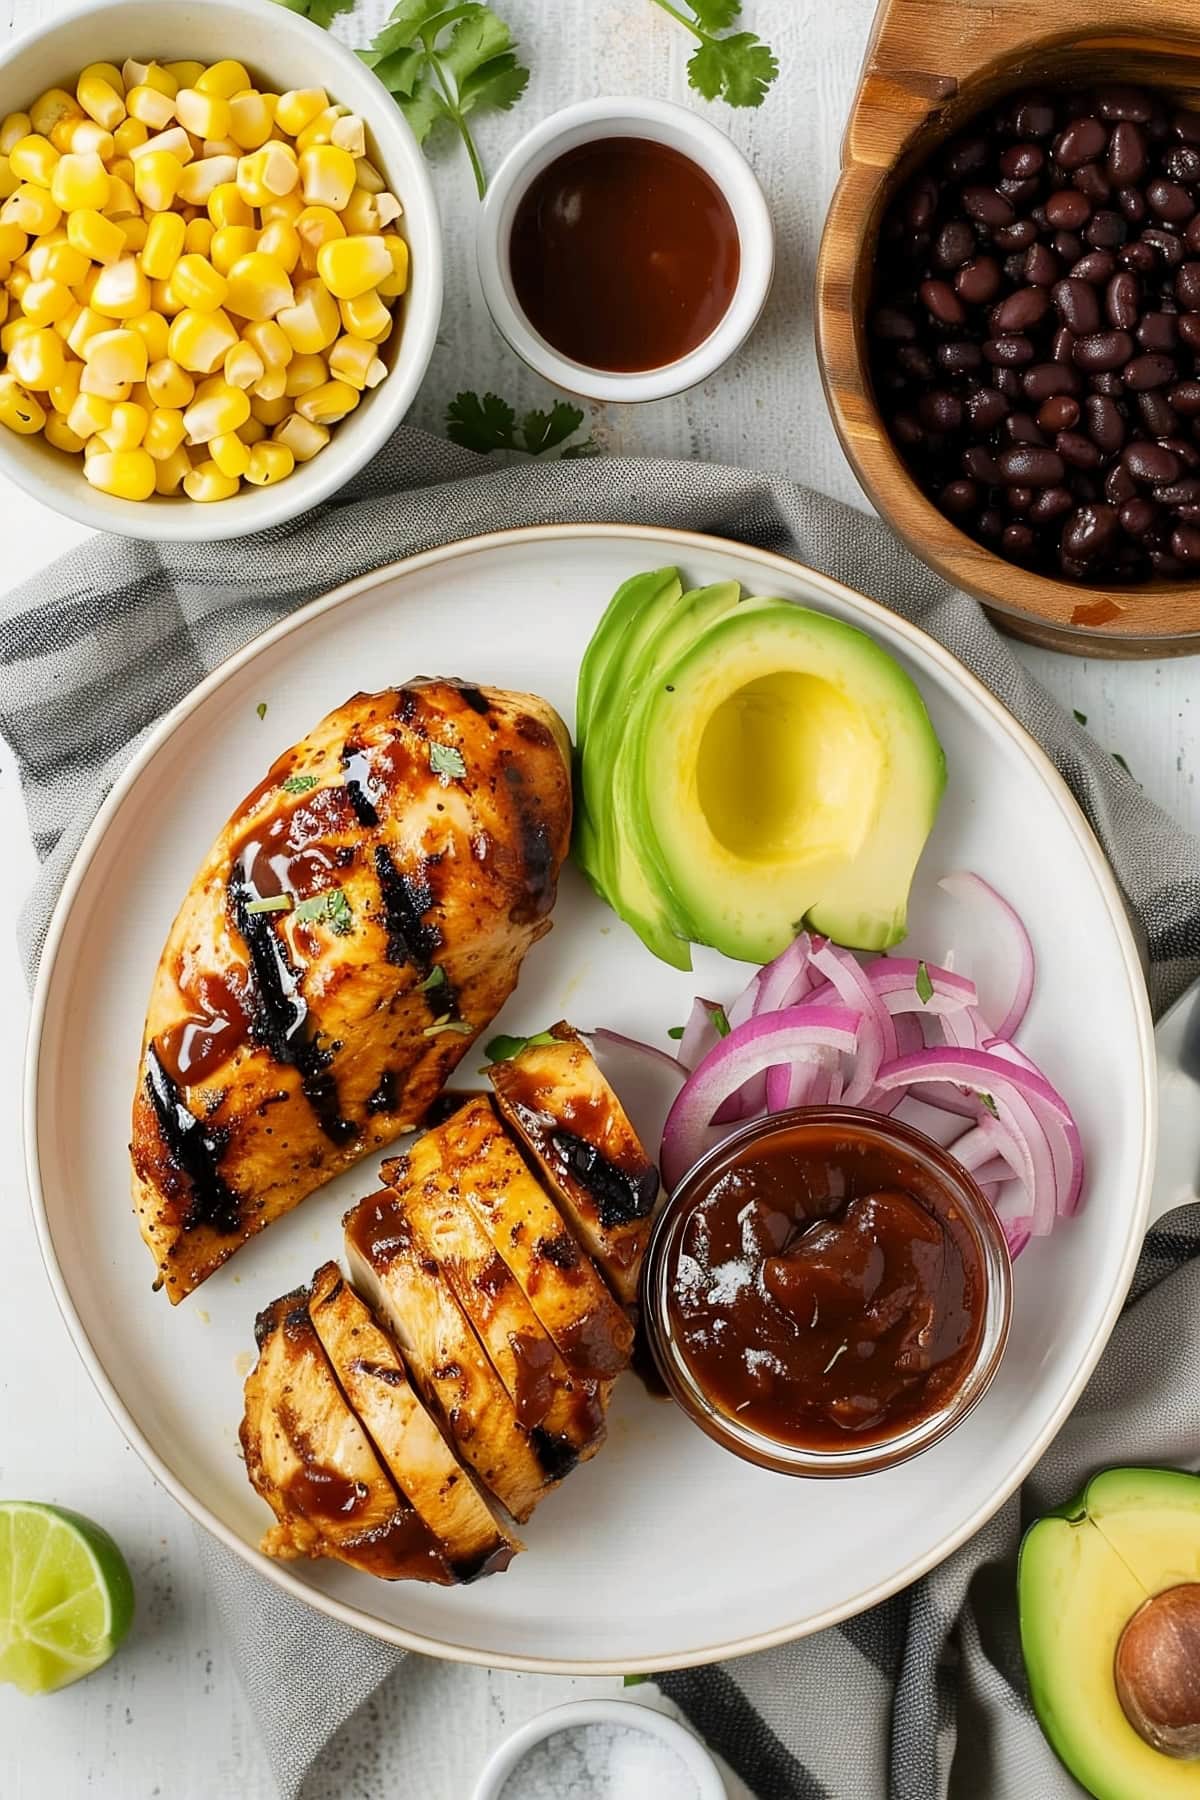 BBQ Chicken Salad Ingredients: Corn, Black Beans, Avocadoes, Onions and Sauce